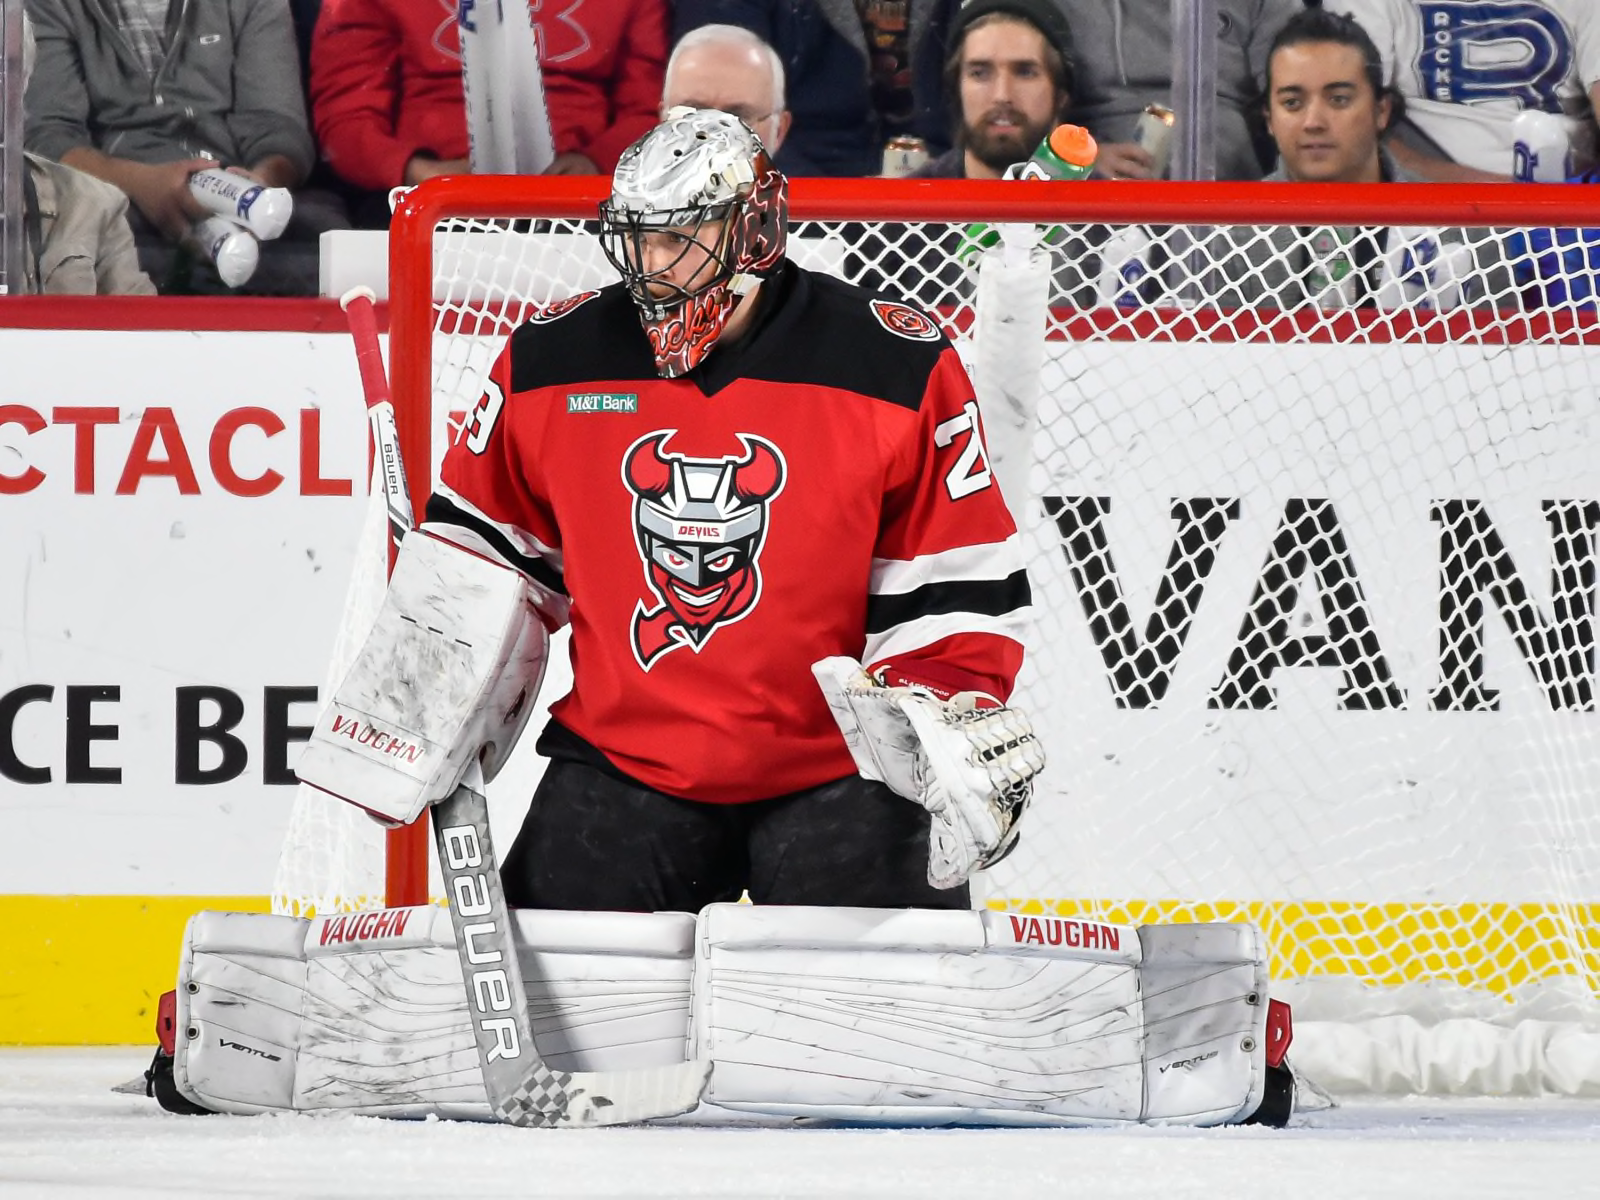 New Jersey Devils: Cory Schneider Back to Being a Top 5 NHL Goalie